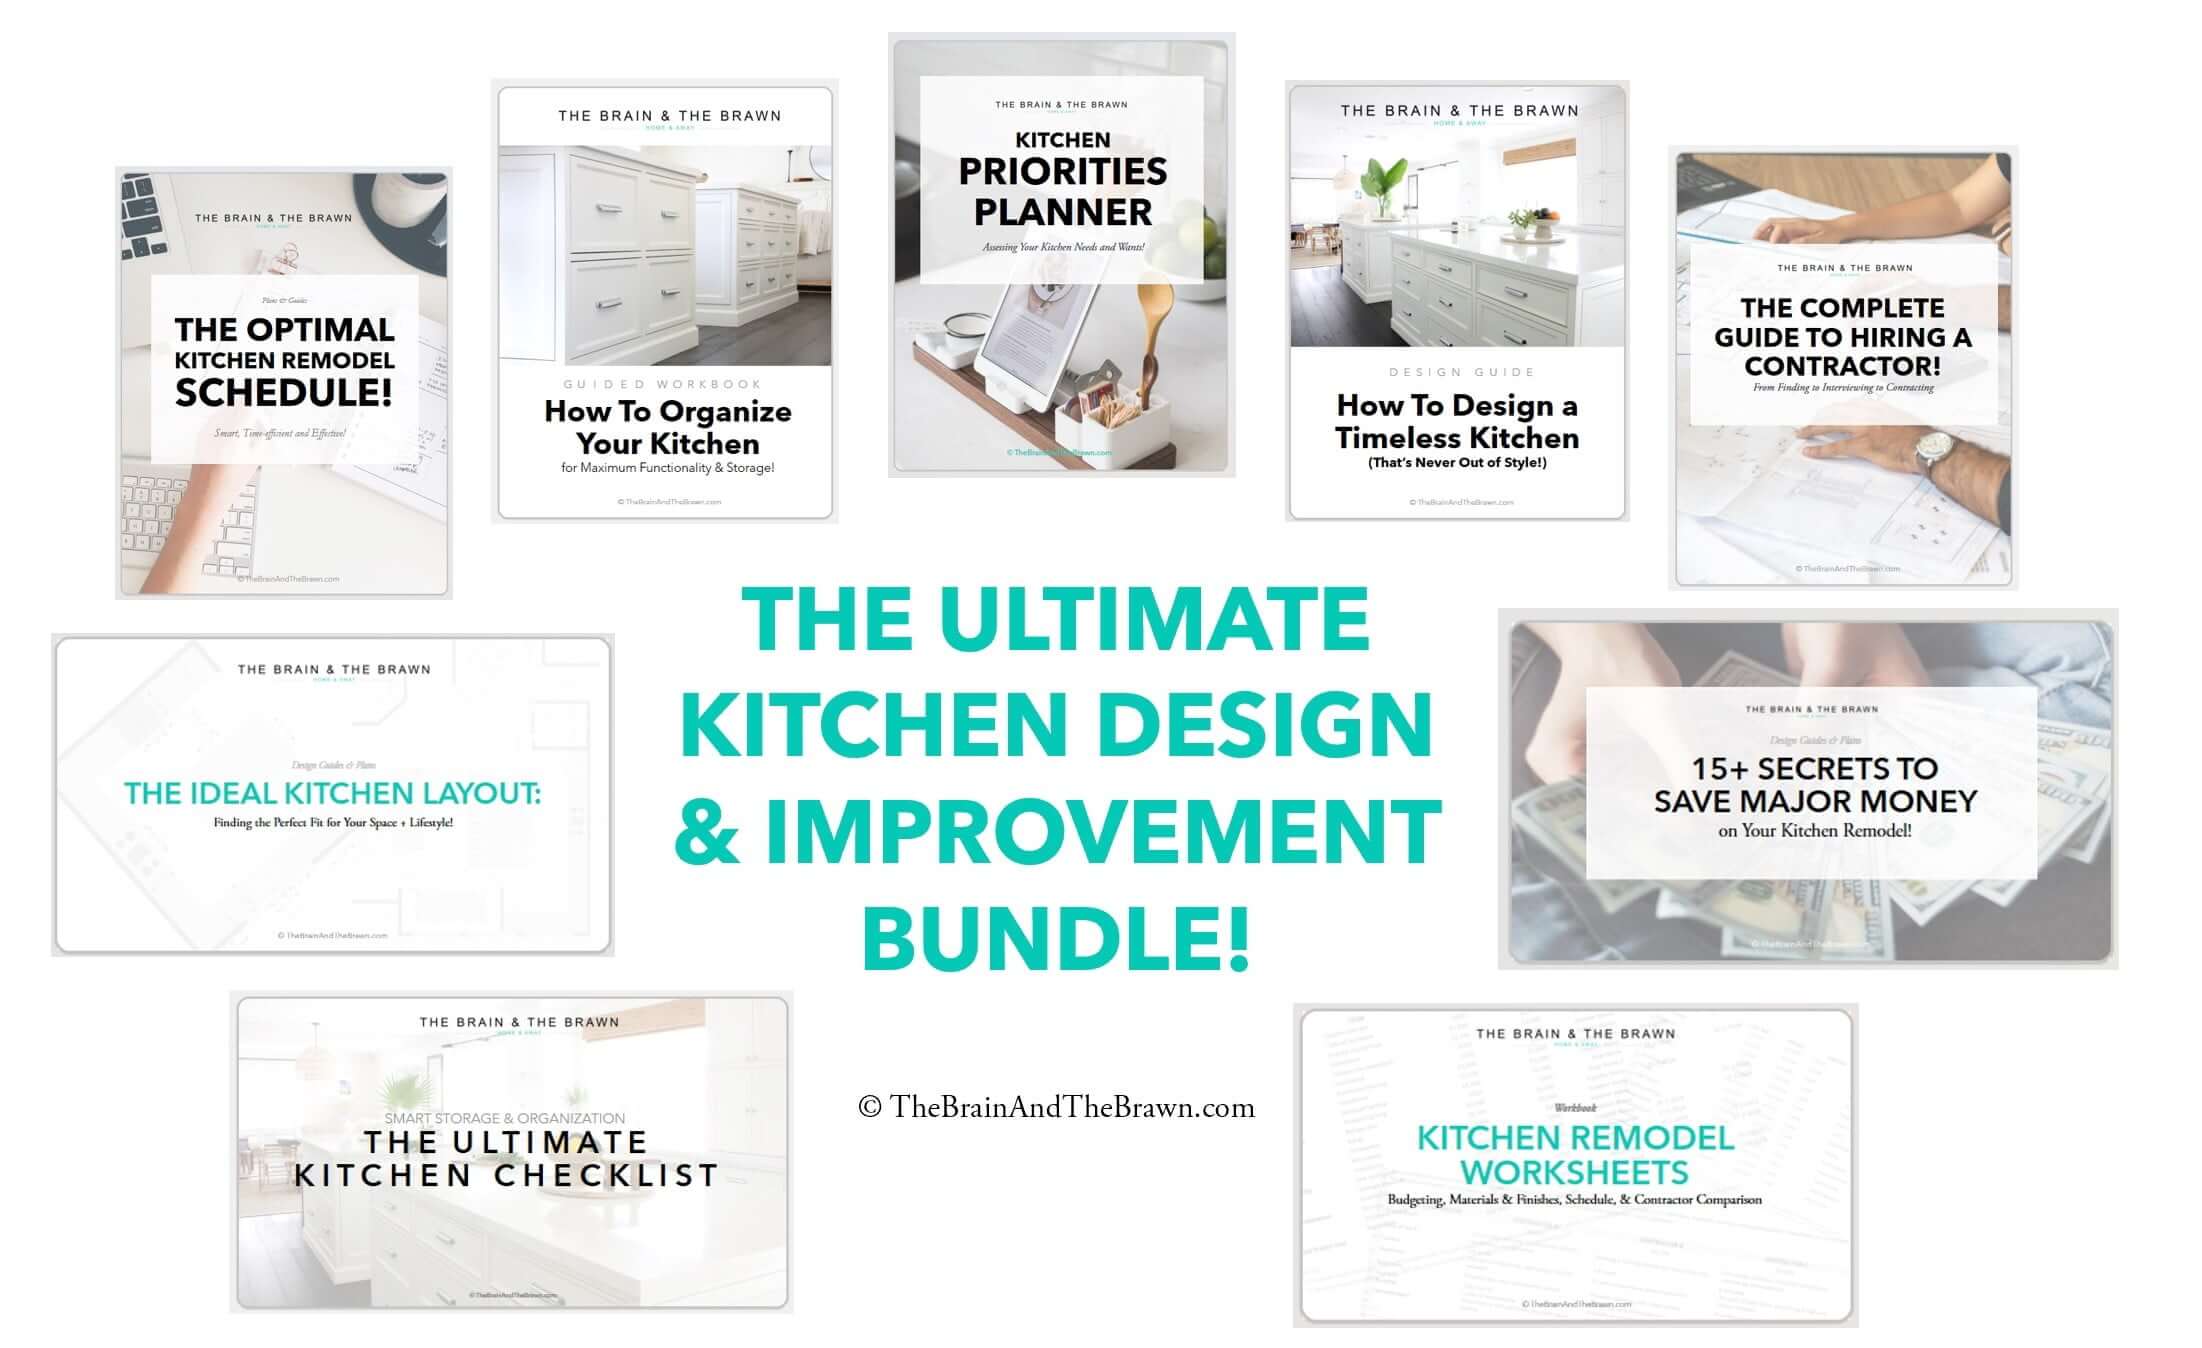 The Upgraded Kitchen Bundle! (6 + 3 FREE!) - The Brain & The Brawn